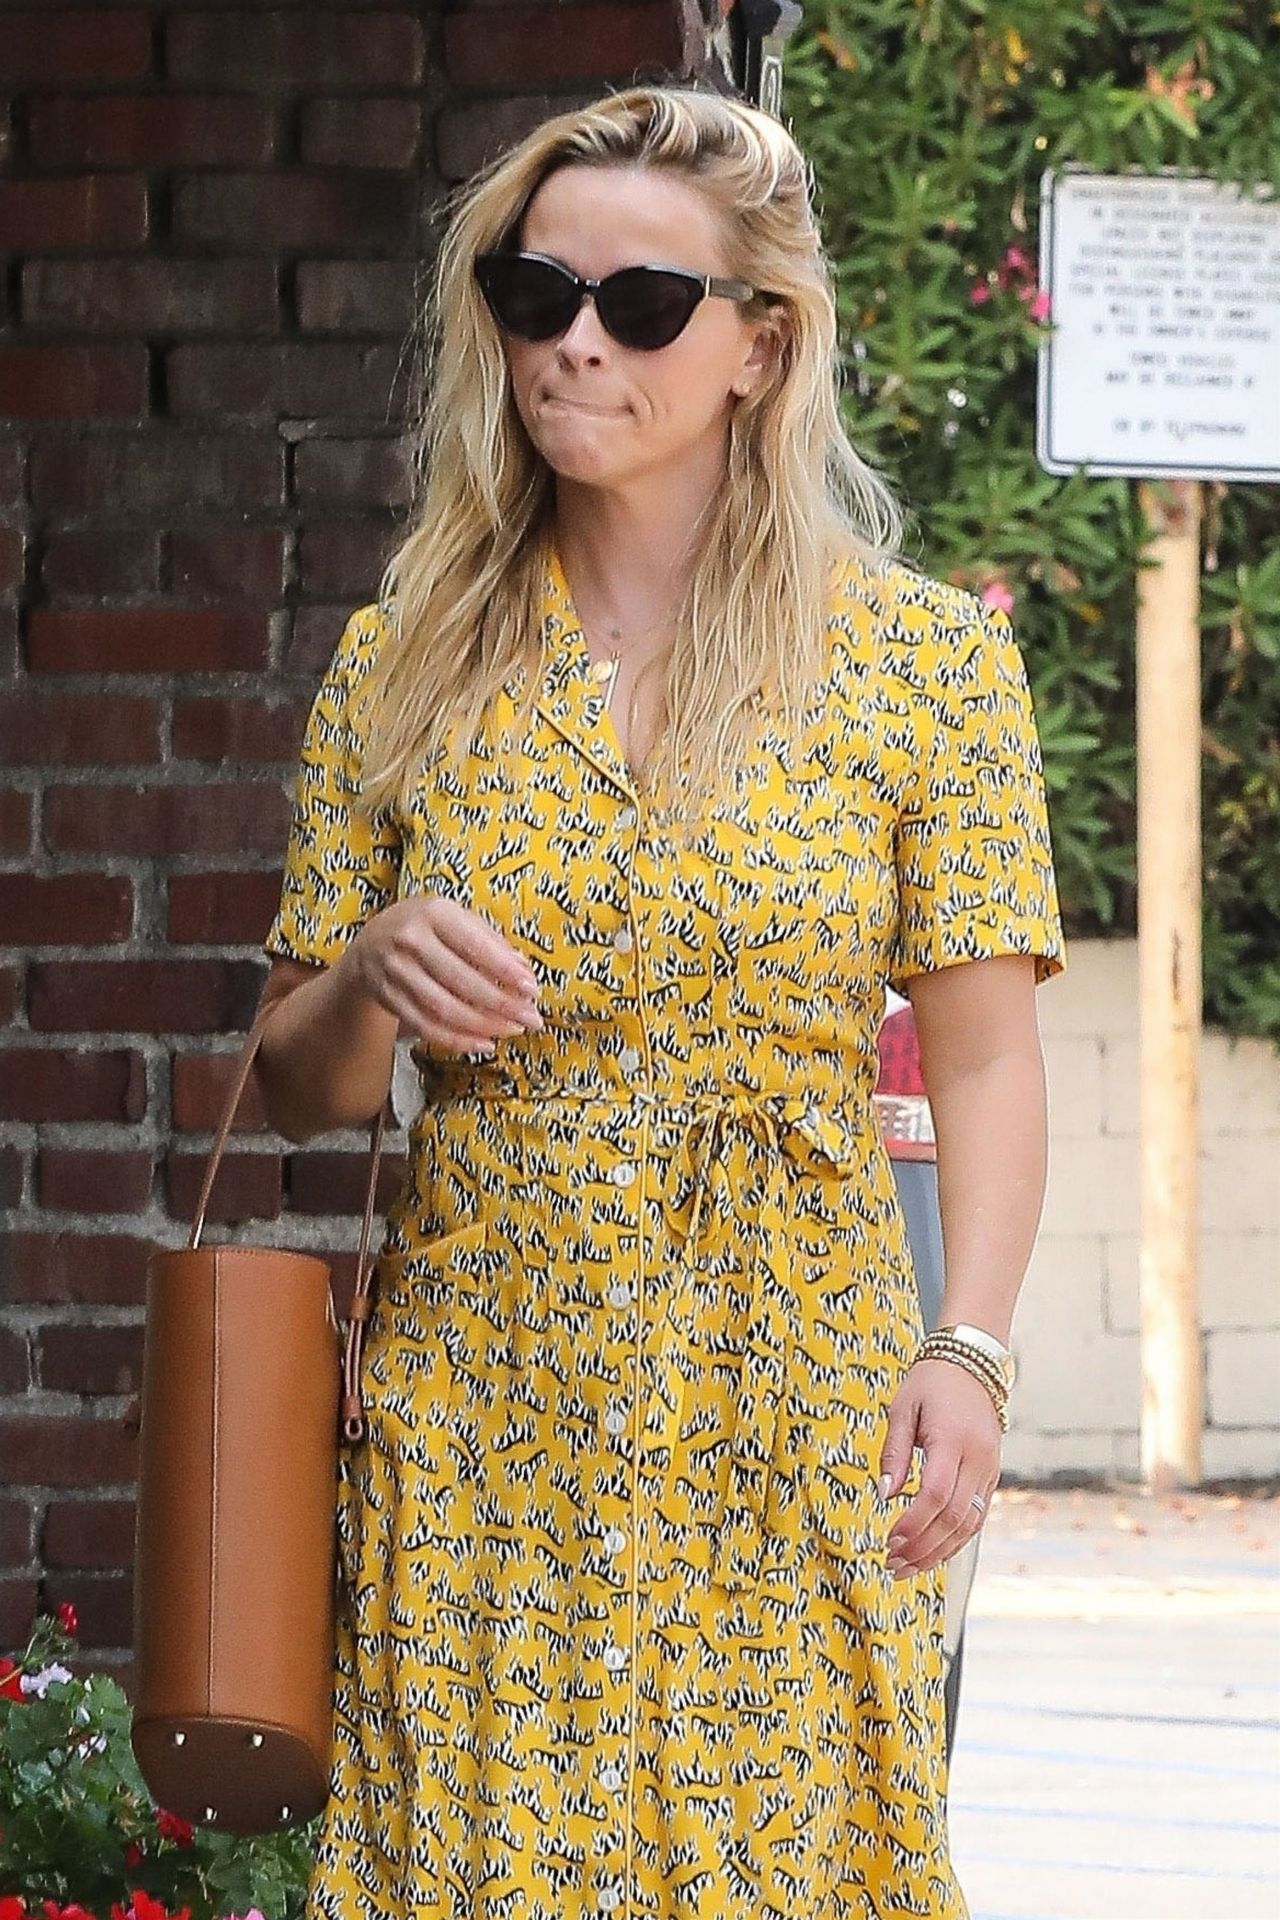 Reese Witherspoon in yellow midi dress in Santa Monica on August 4